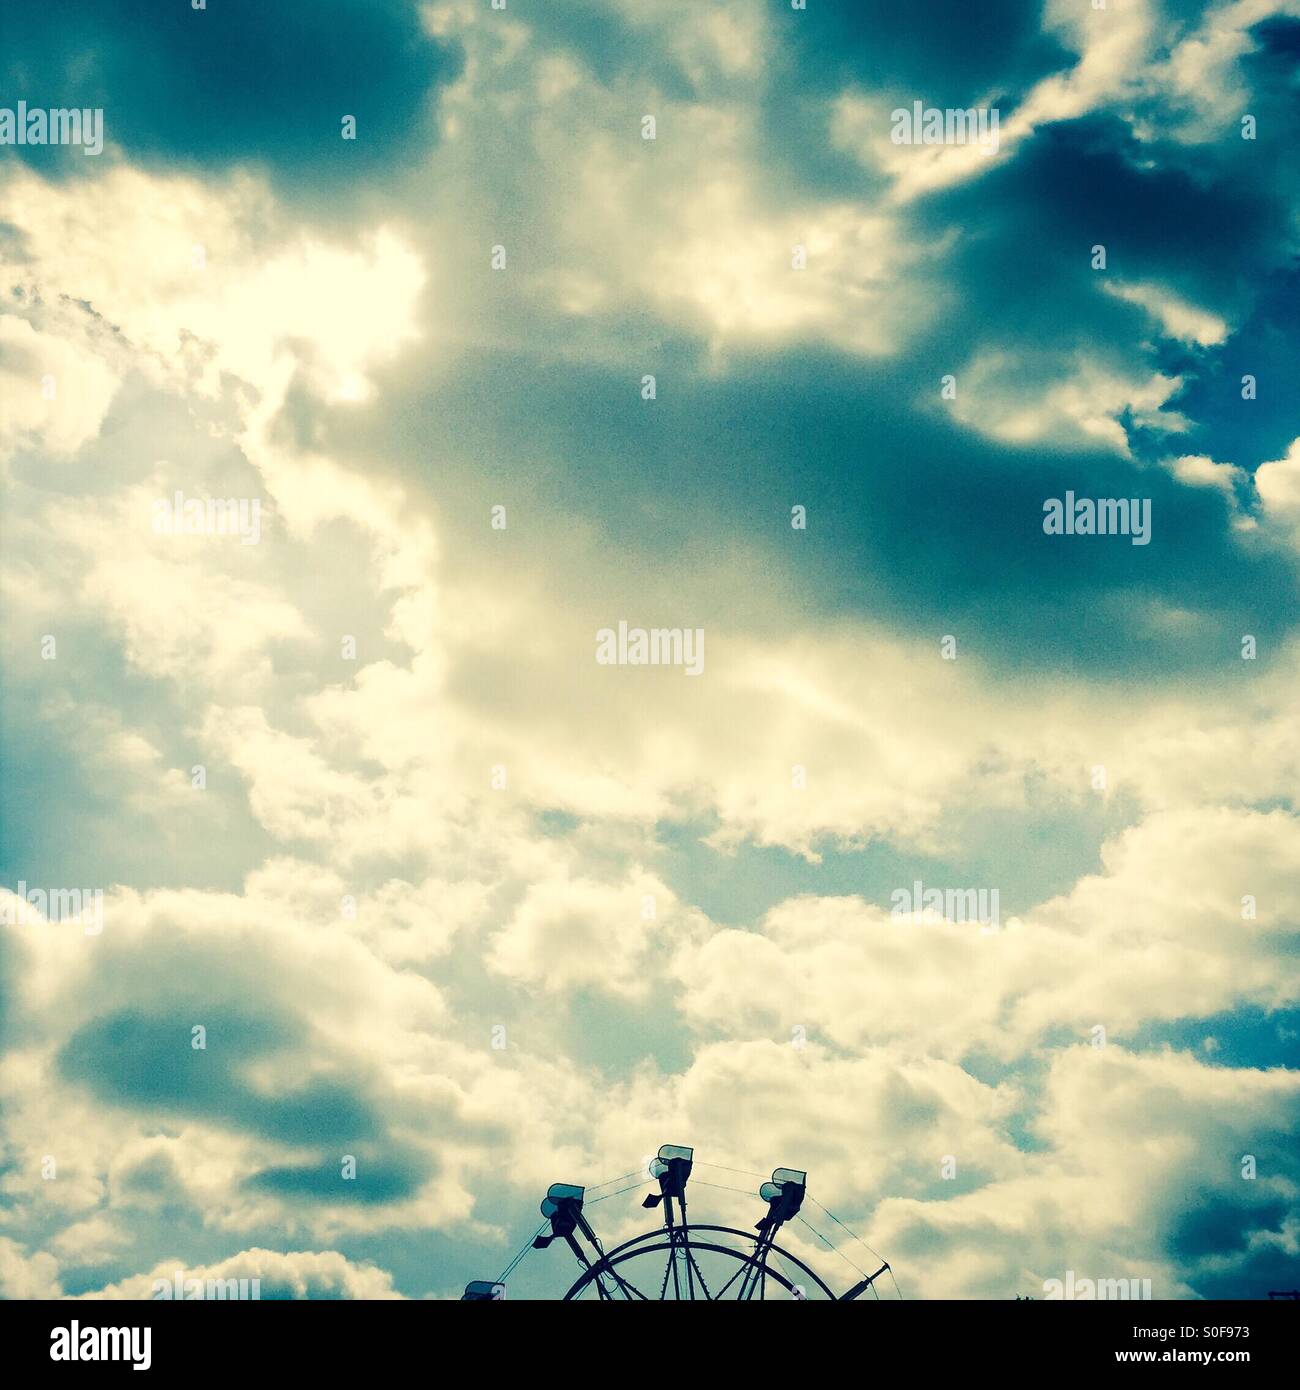 A Ferris wheel and clouds. Stock Photo